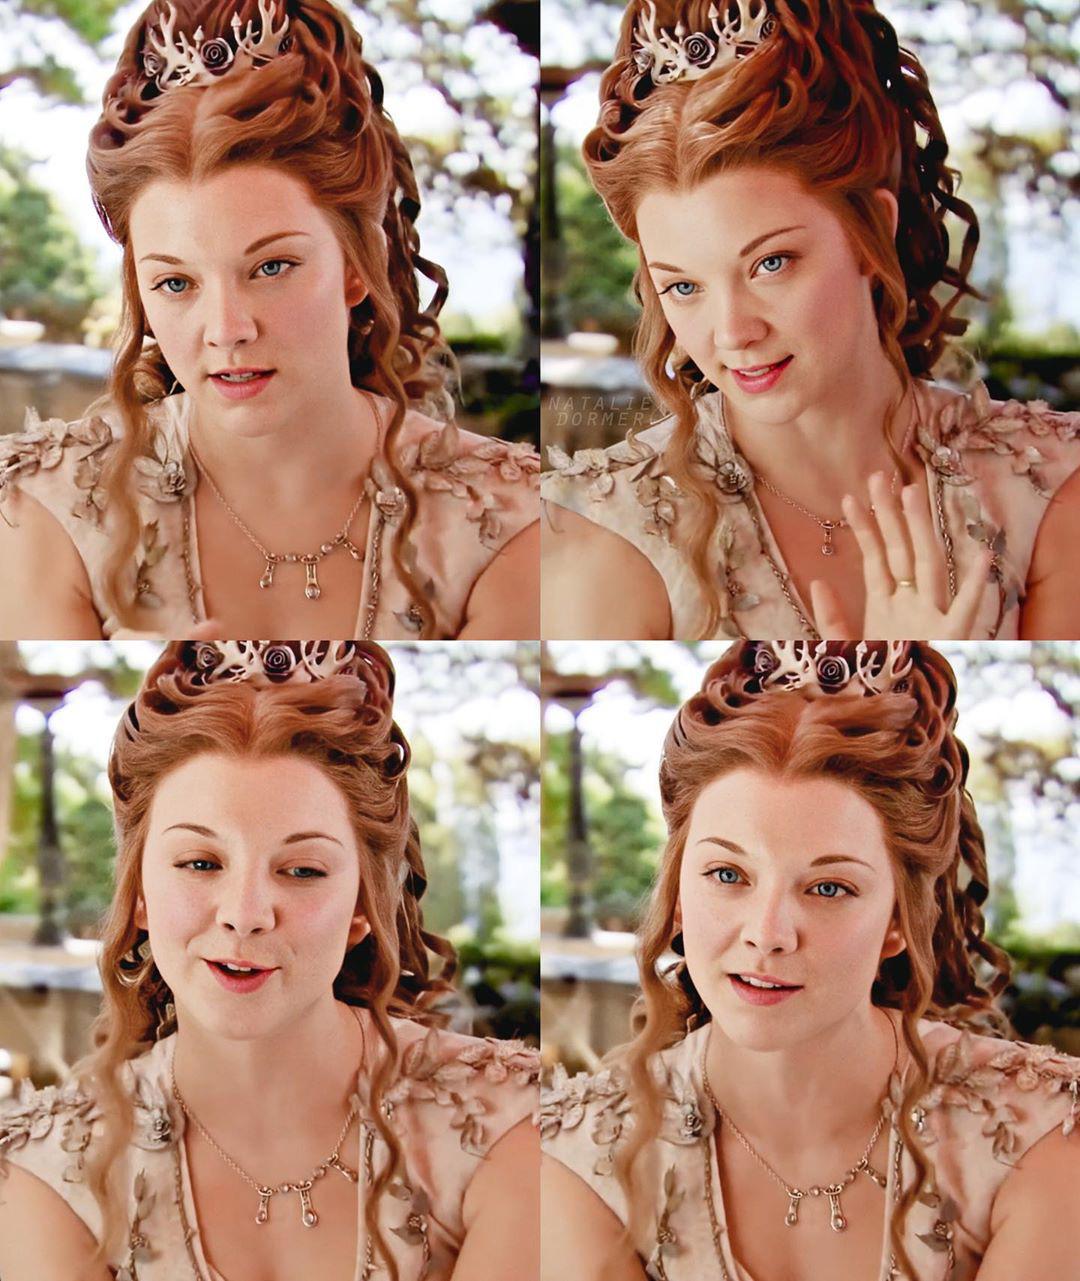 Imagine being a peasant and capturing Queen Margaery (Natalie Dormer). You have 24 hours to use her, what would you do?